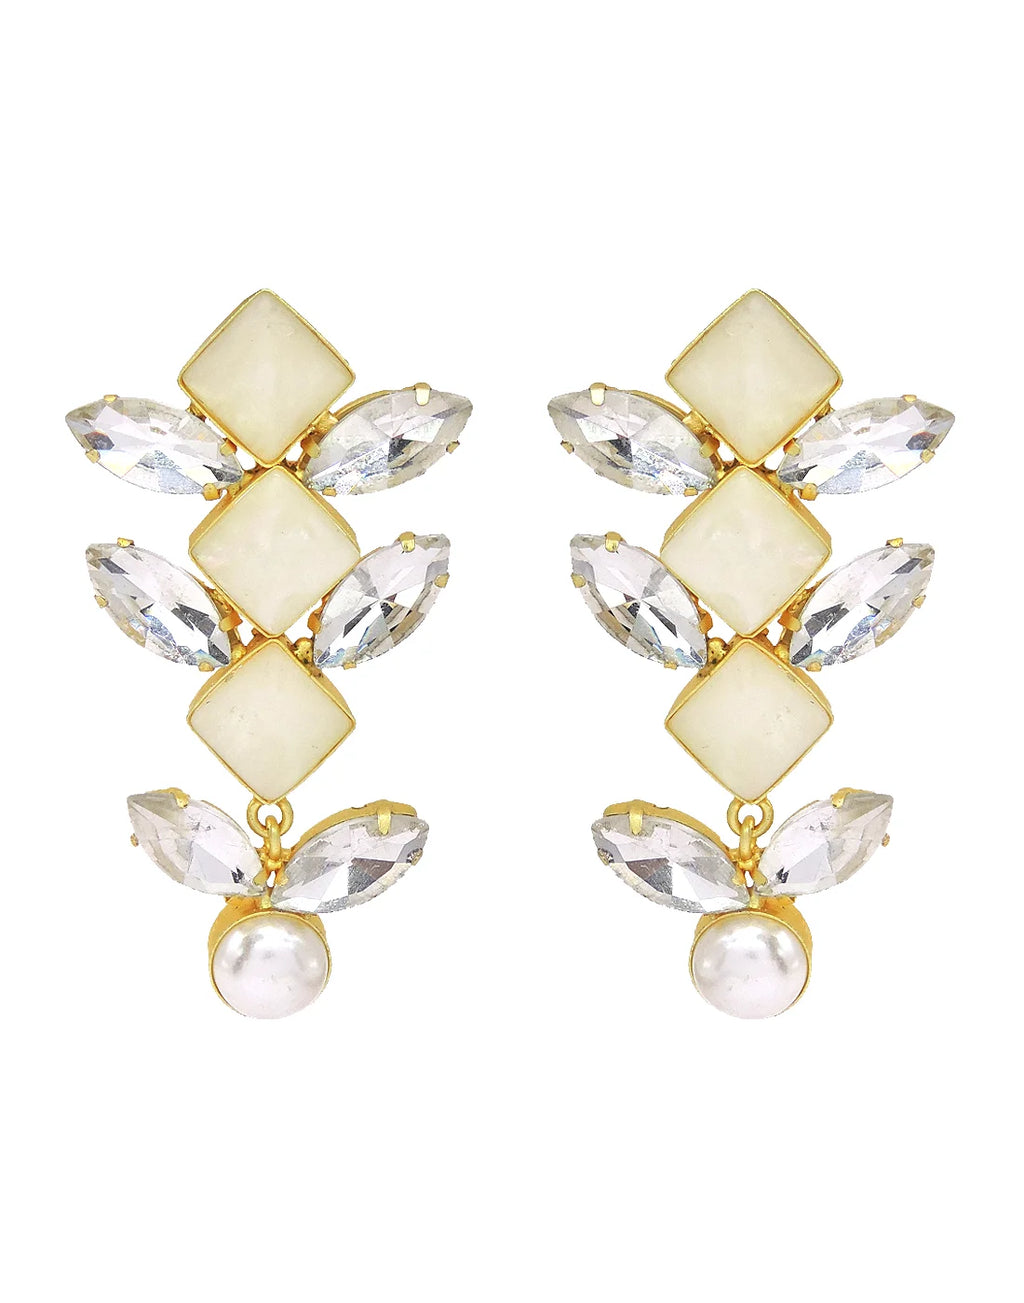 Pearl & Crystal Statement Earrings- Handcrafted Jewellery from Dori